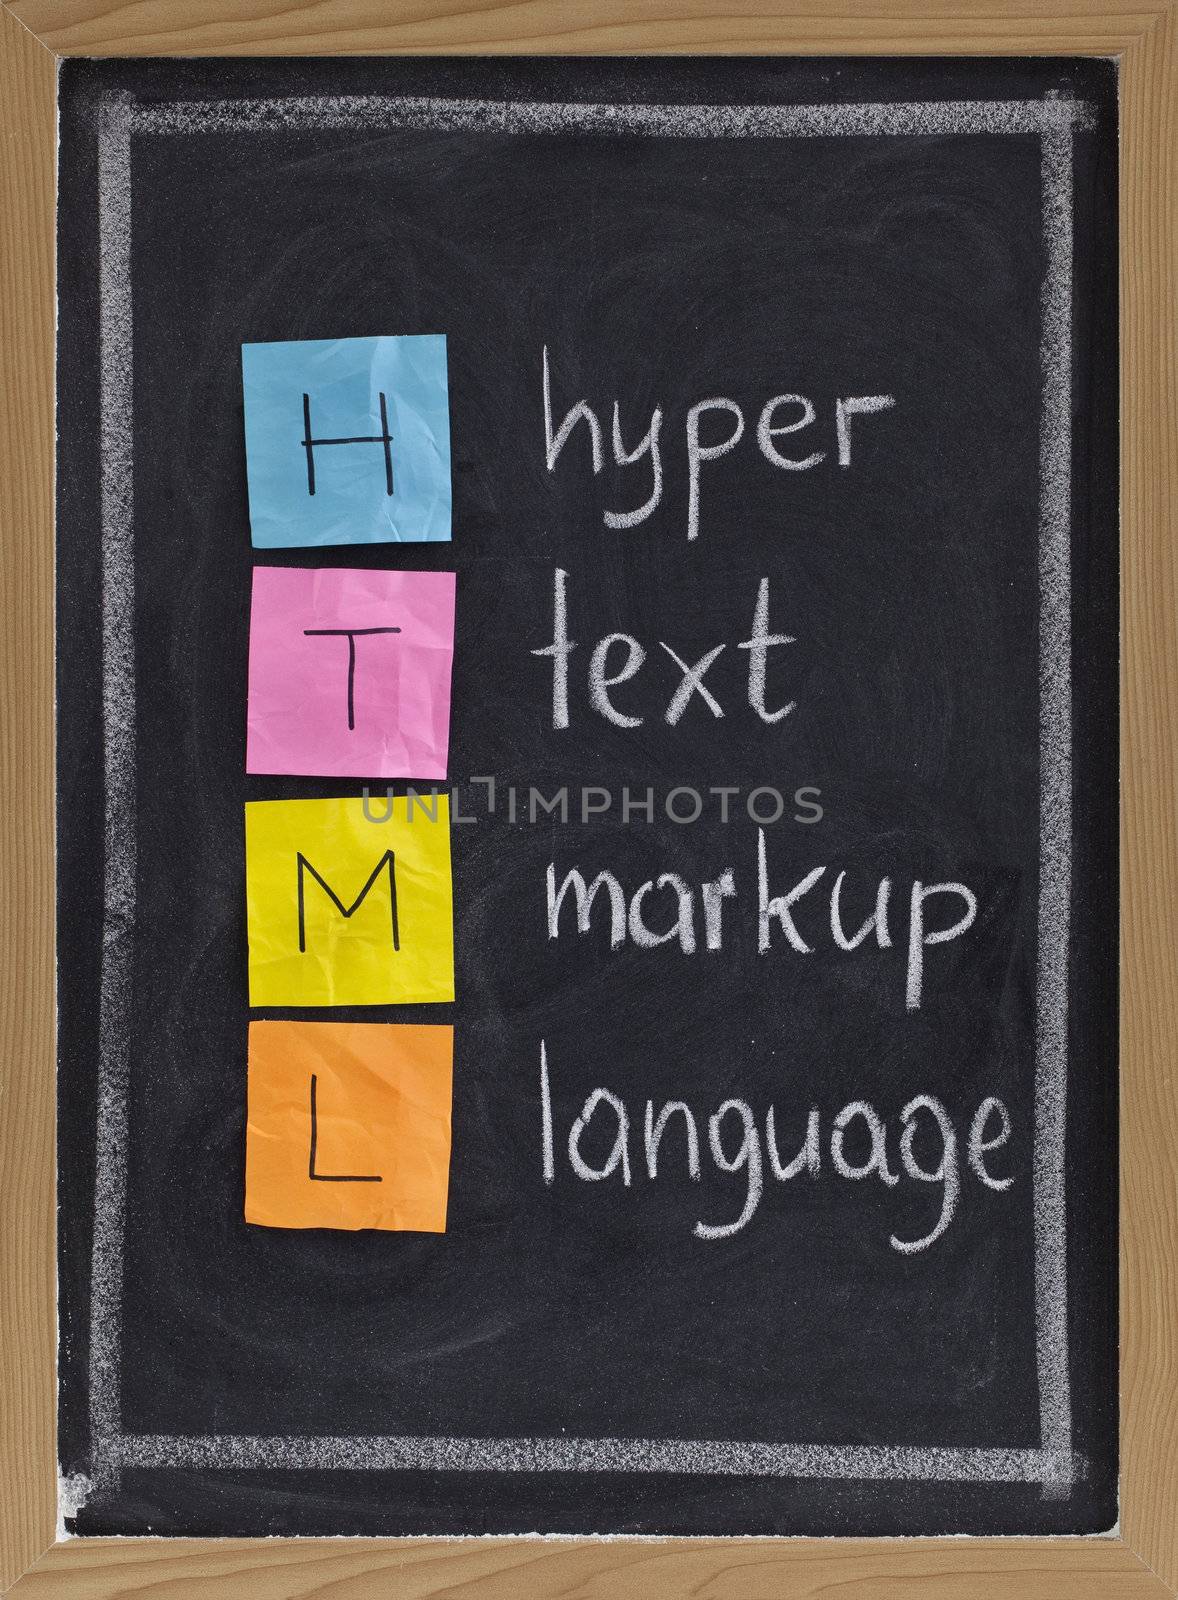 html (hyper text markup language) acronym explained on blackboard, color sticky notes and white chalk handwriting